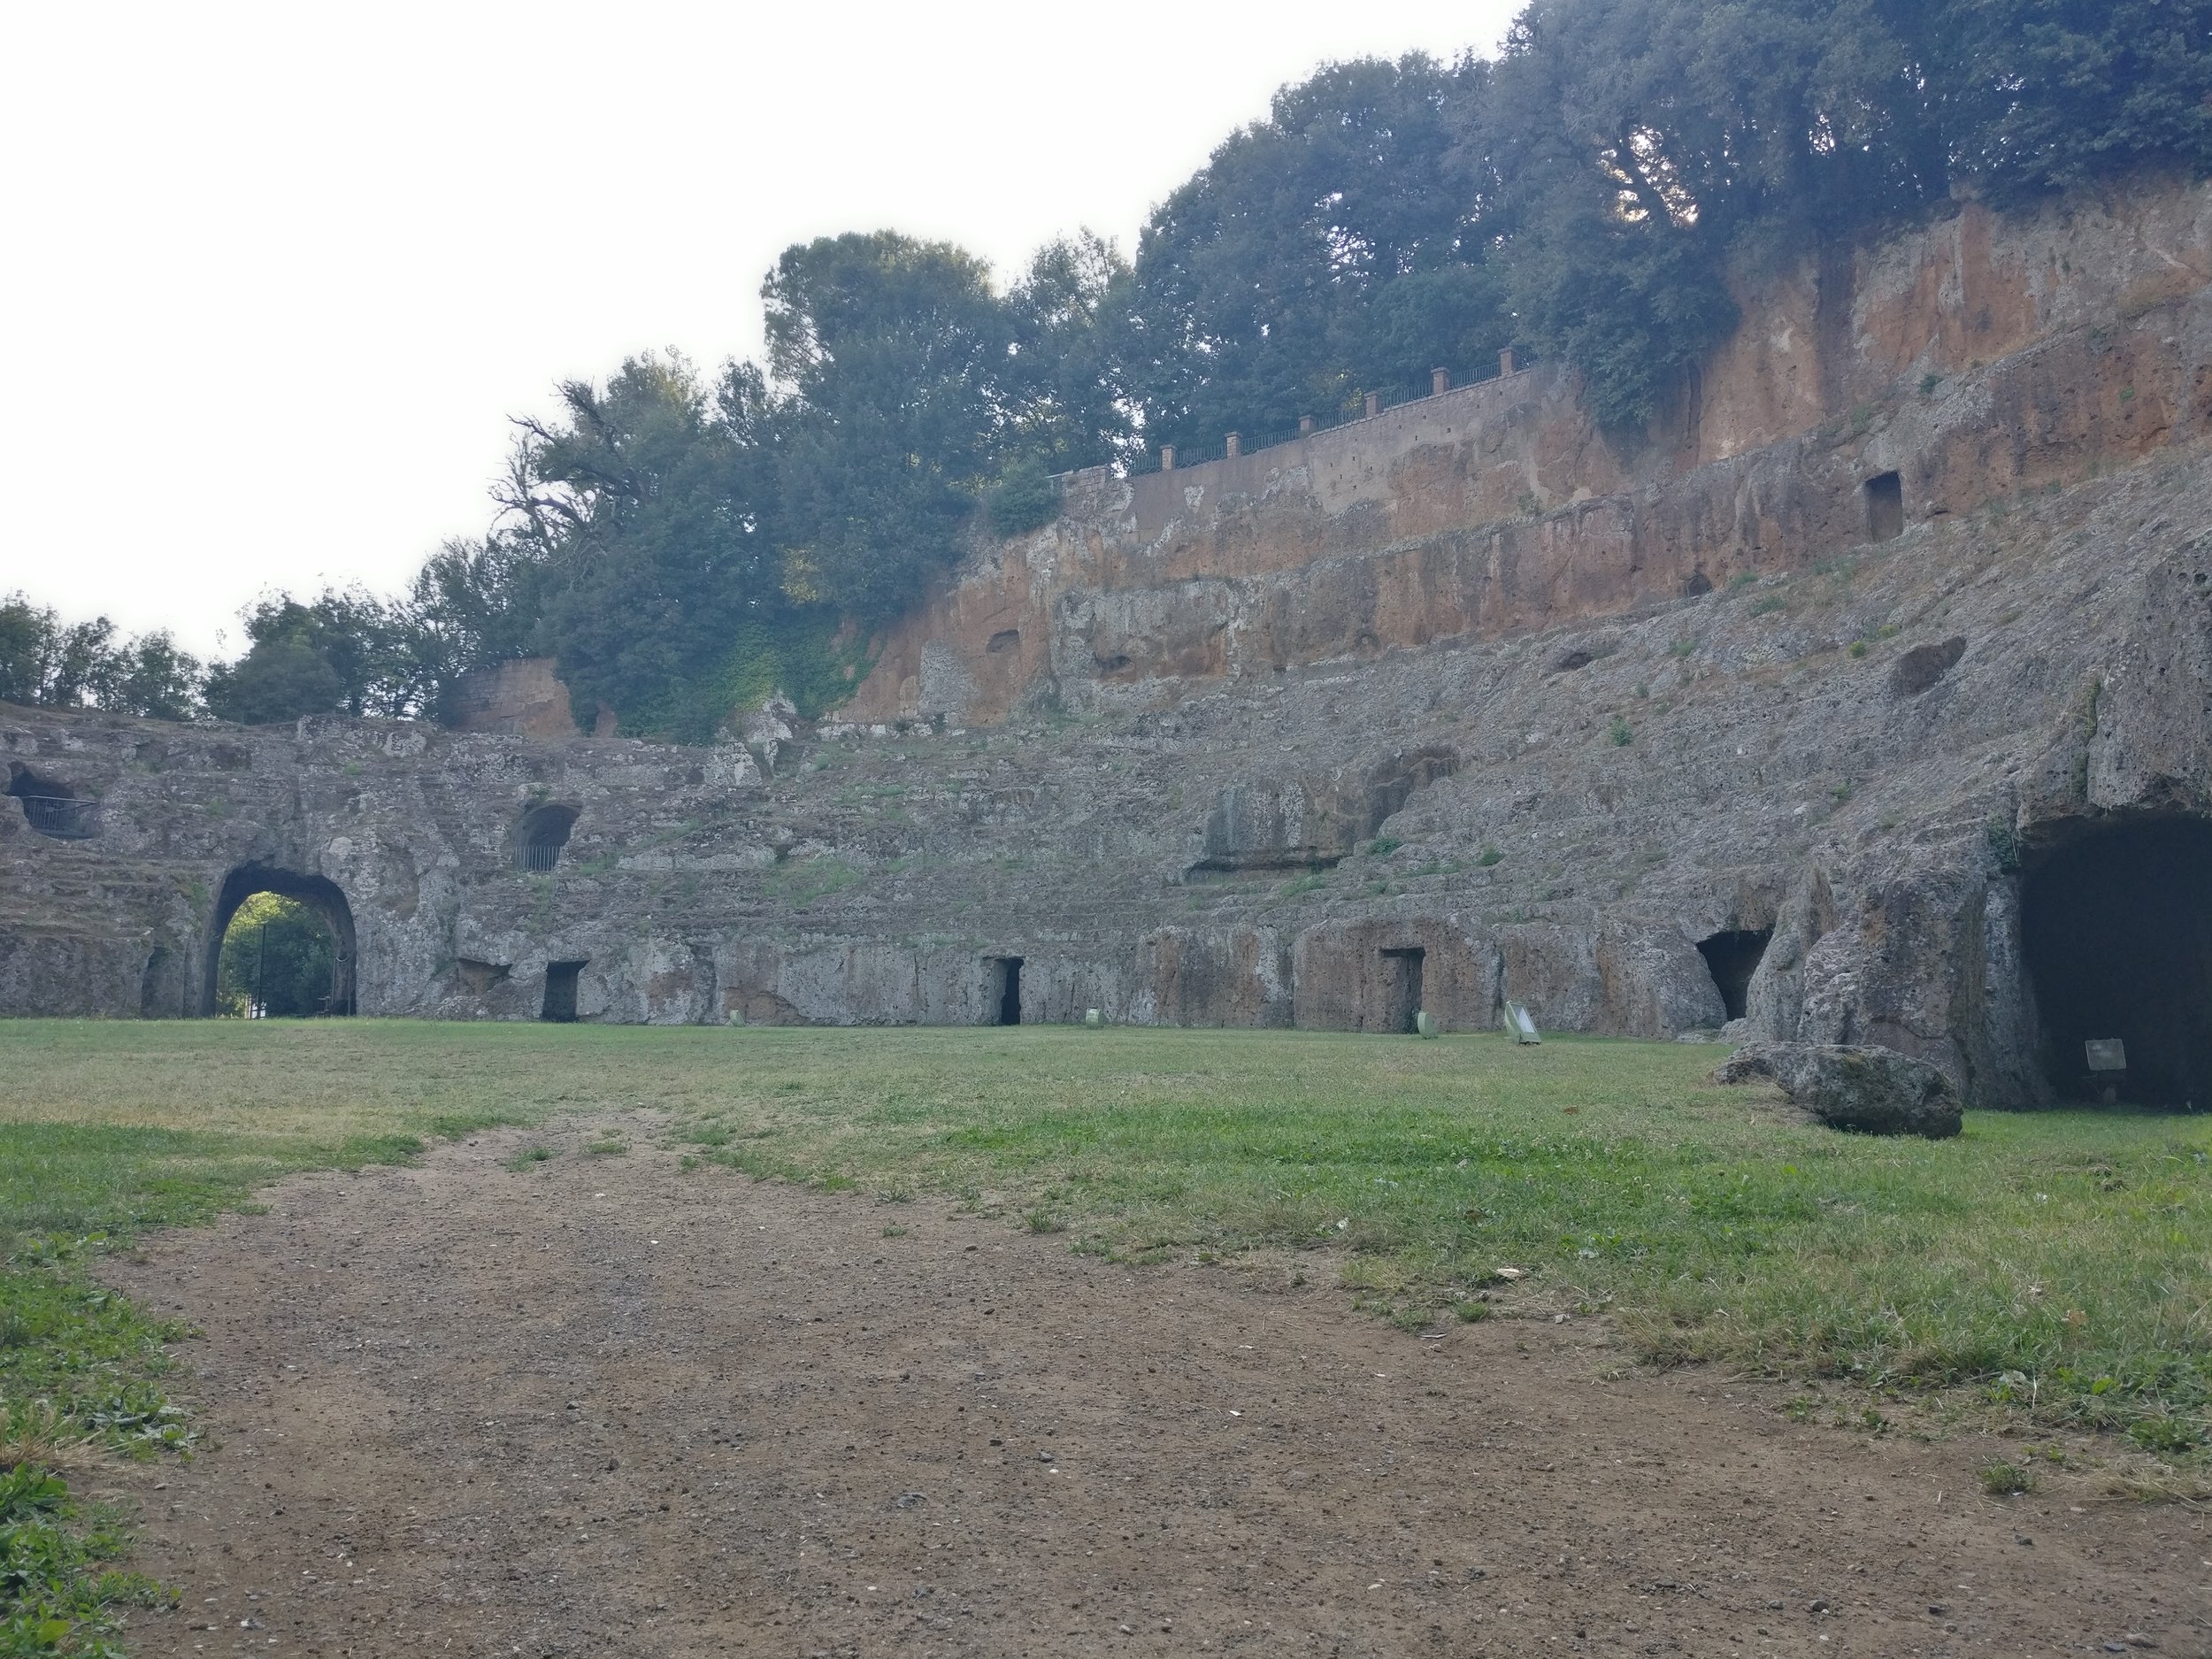  An ancient amphitheatre within a few days of Rome 